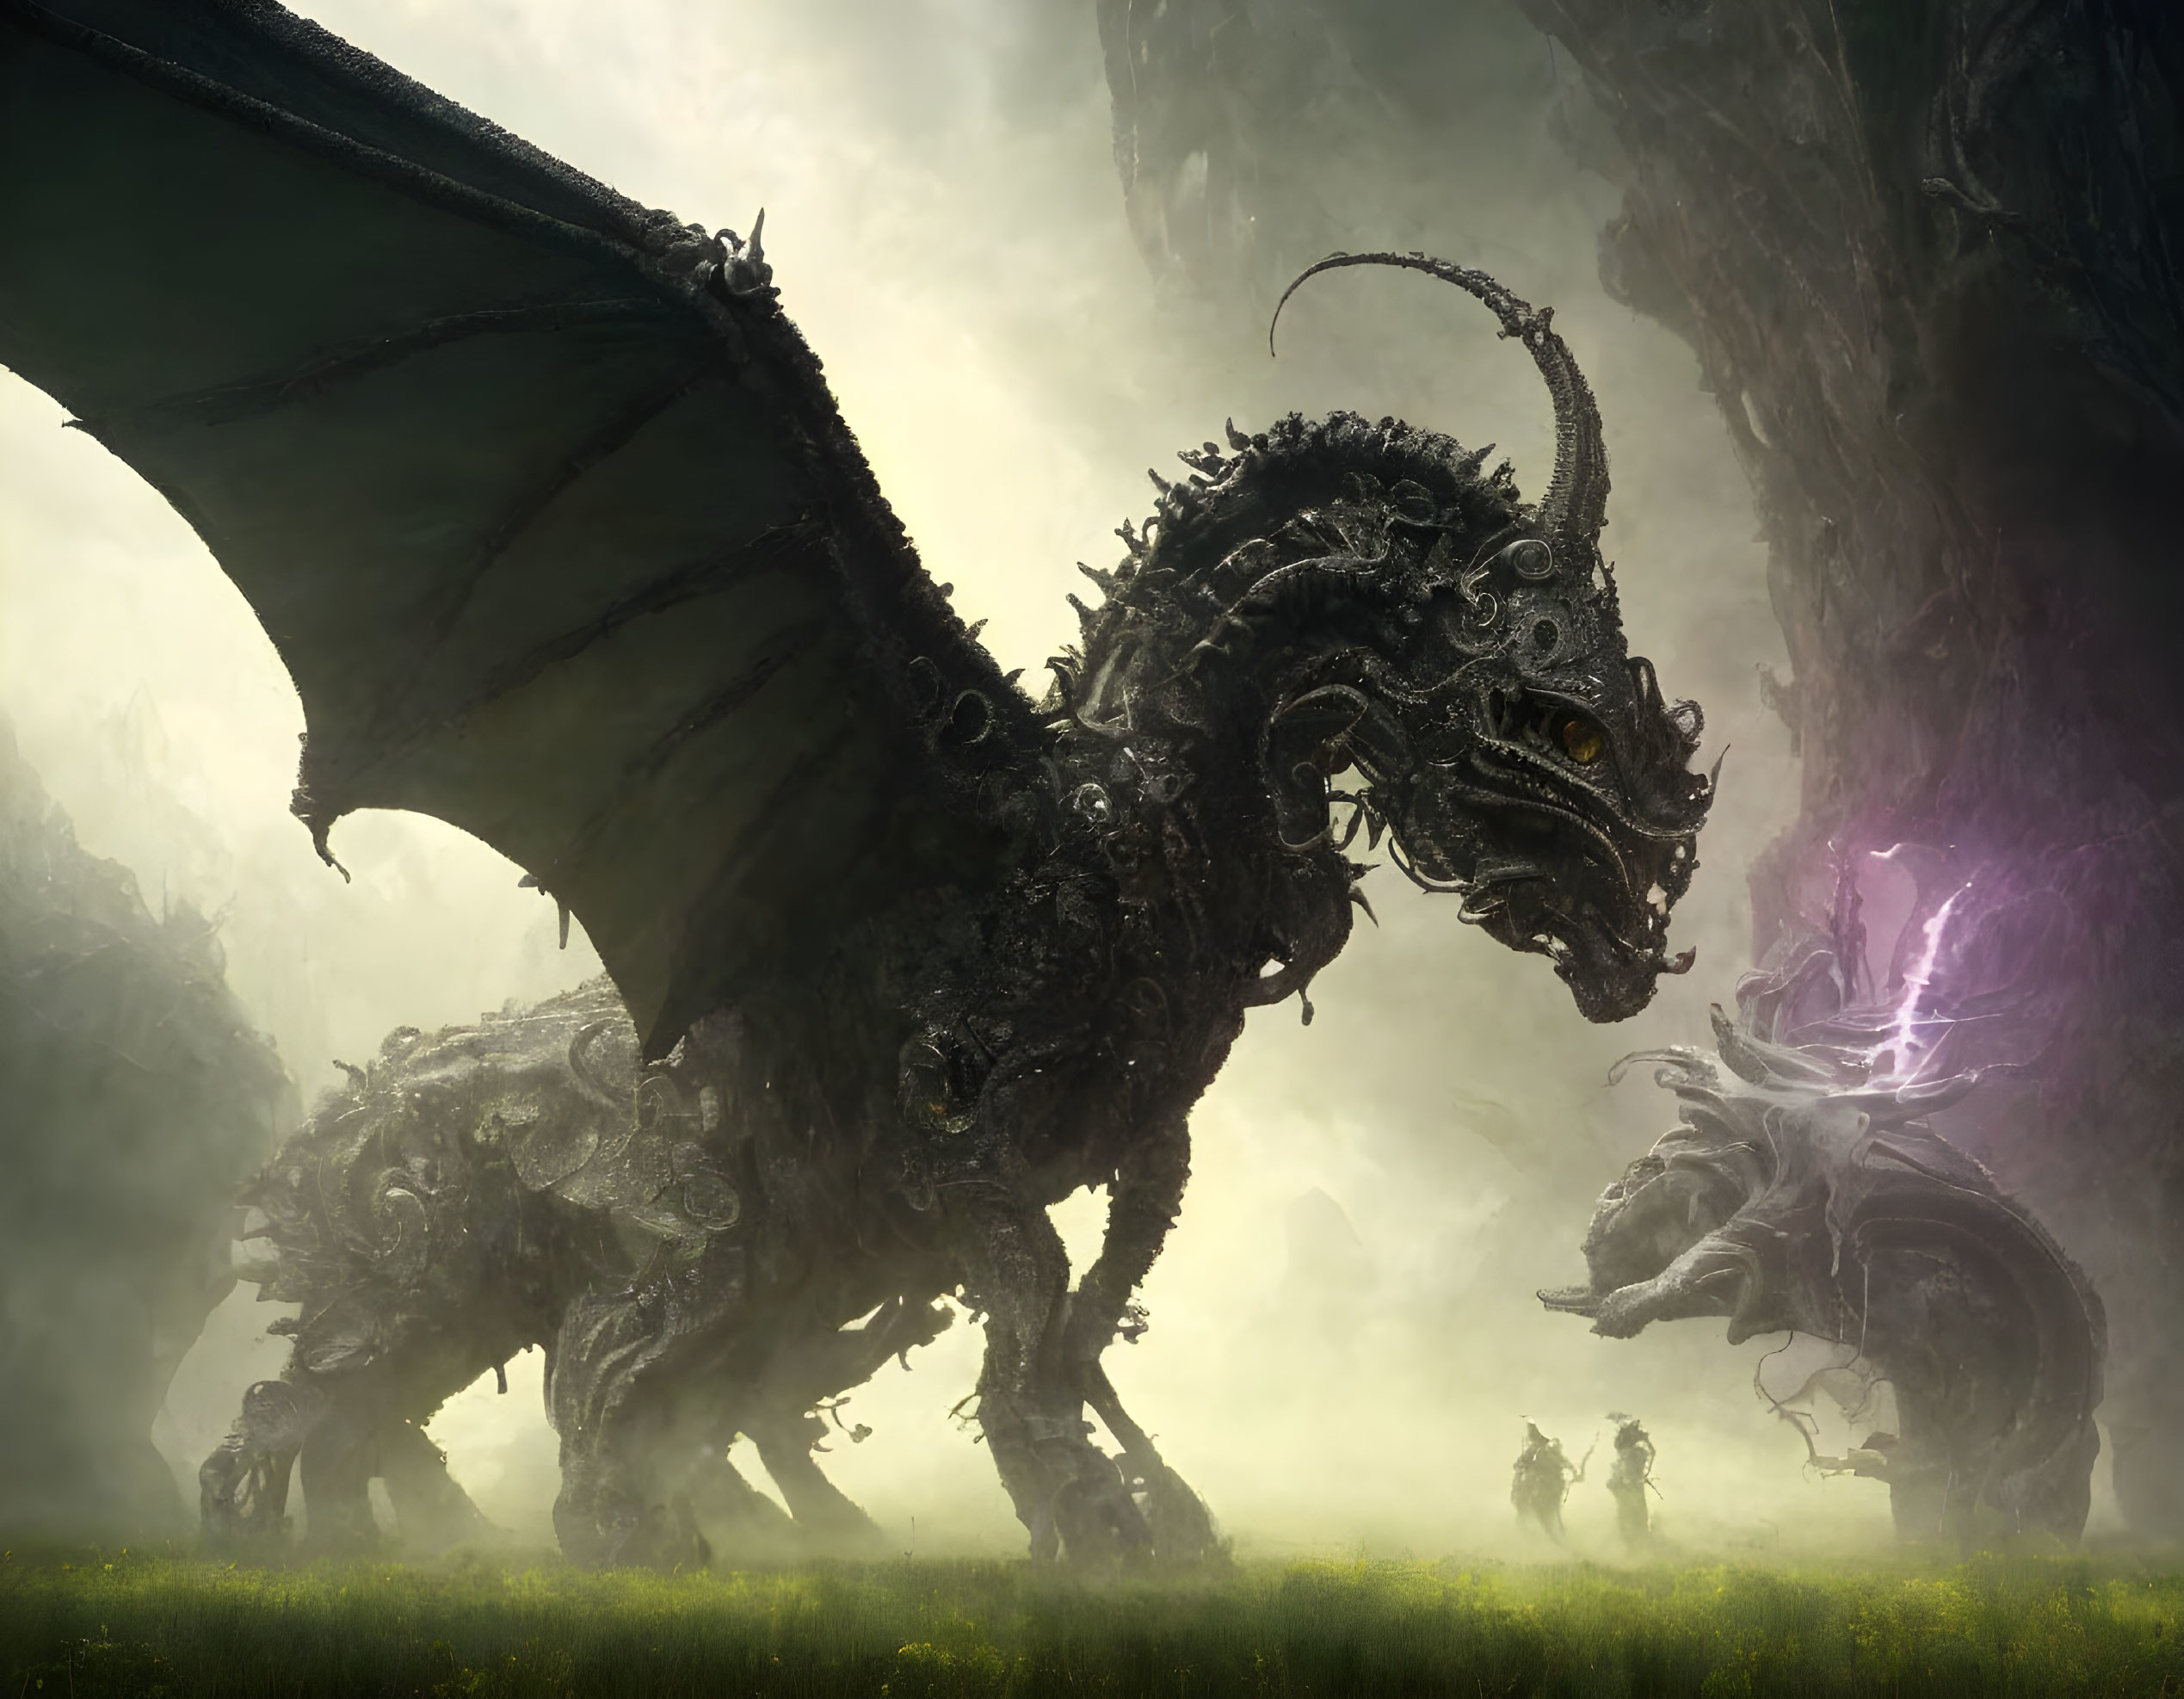 Large dragon dominates misty landscape with humans and magical energy.